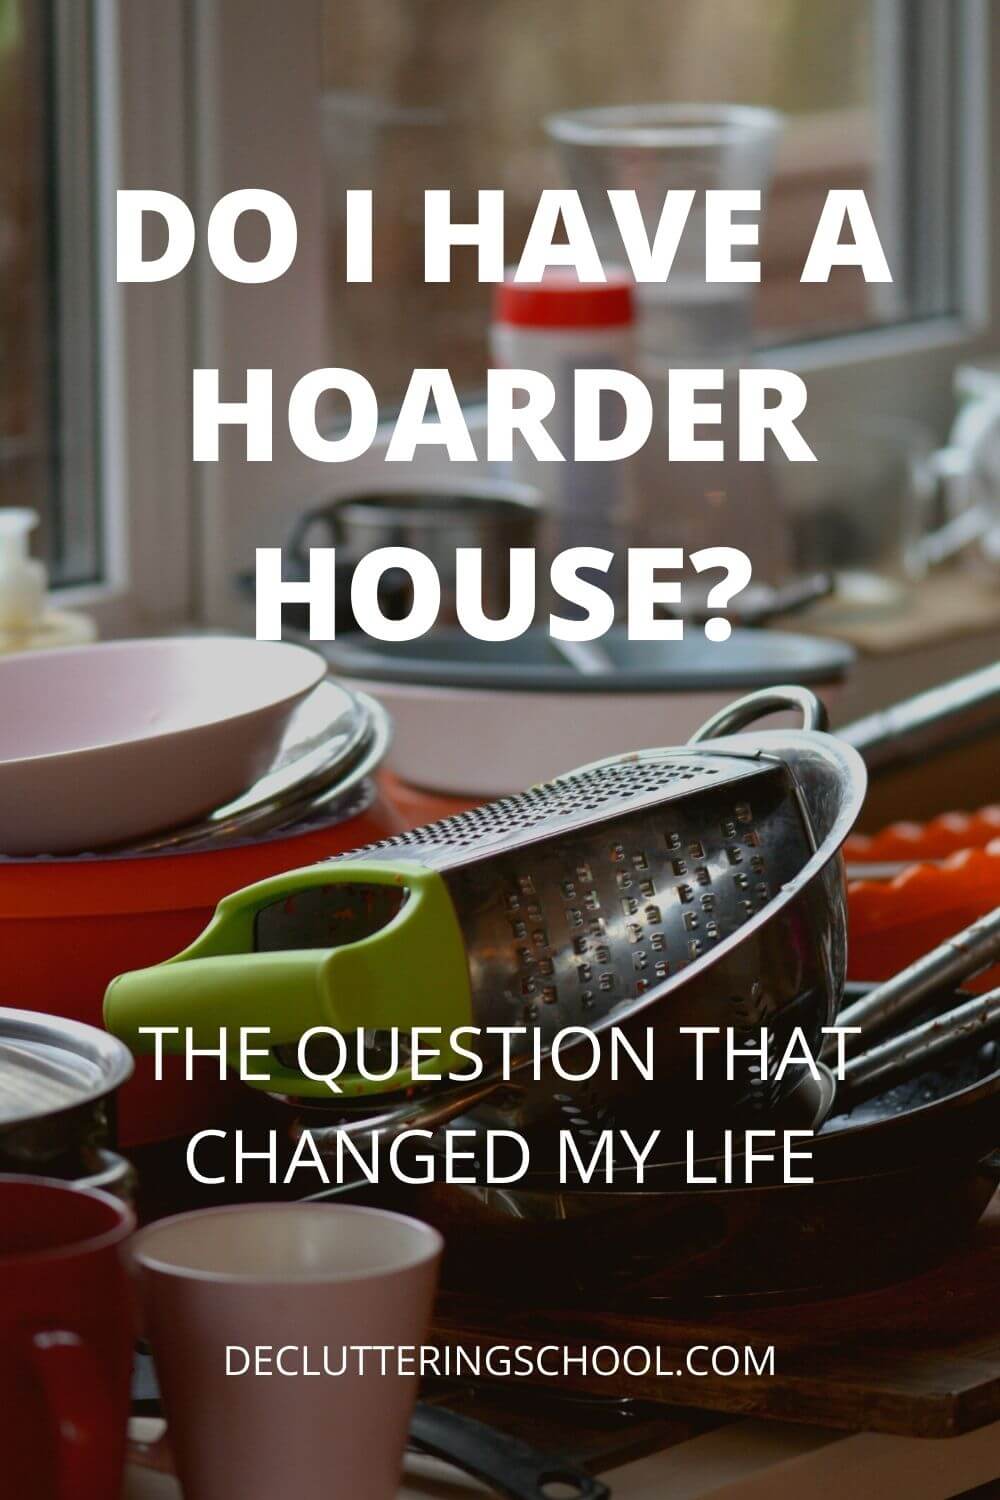 Do I live in a hoarder house?